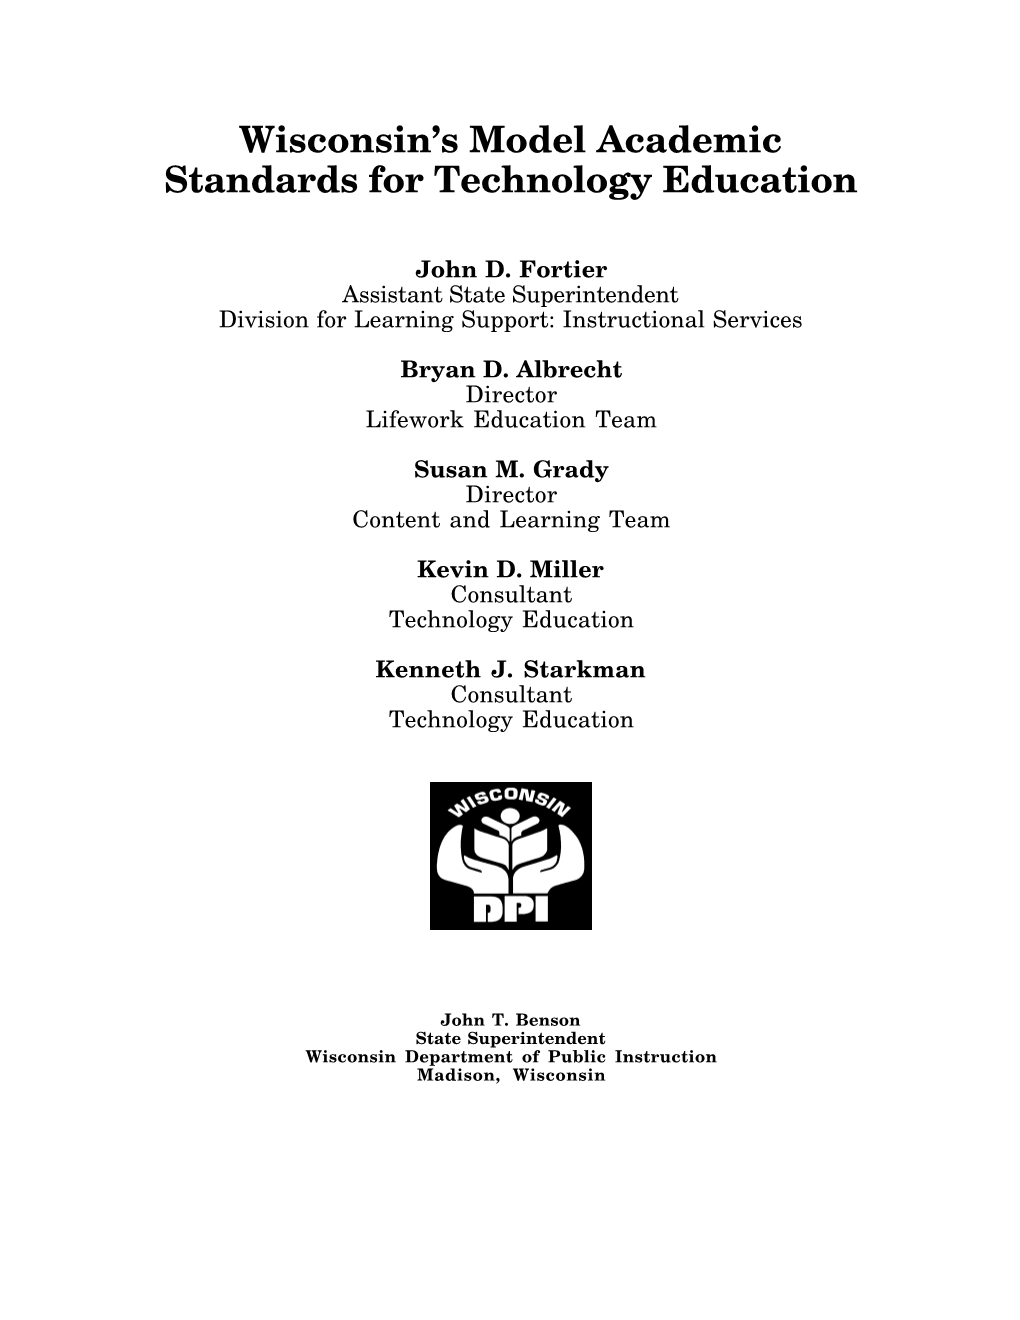 Wisconsin's Model Academic Standards for Technology Education